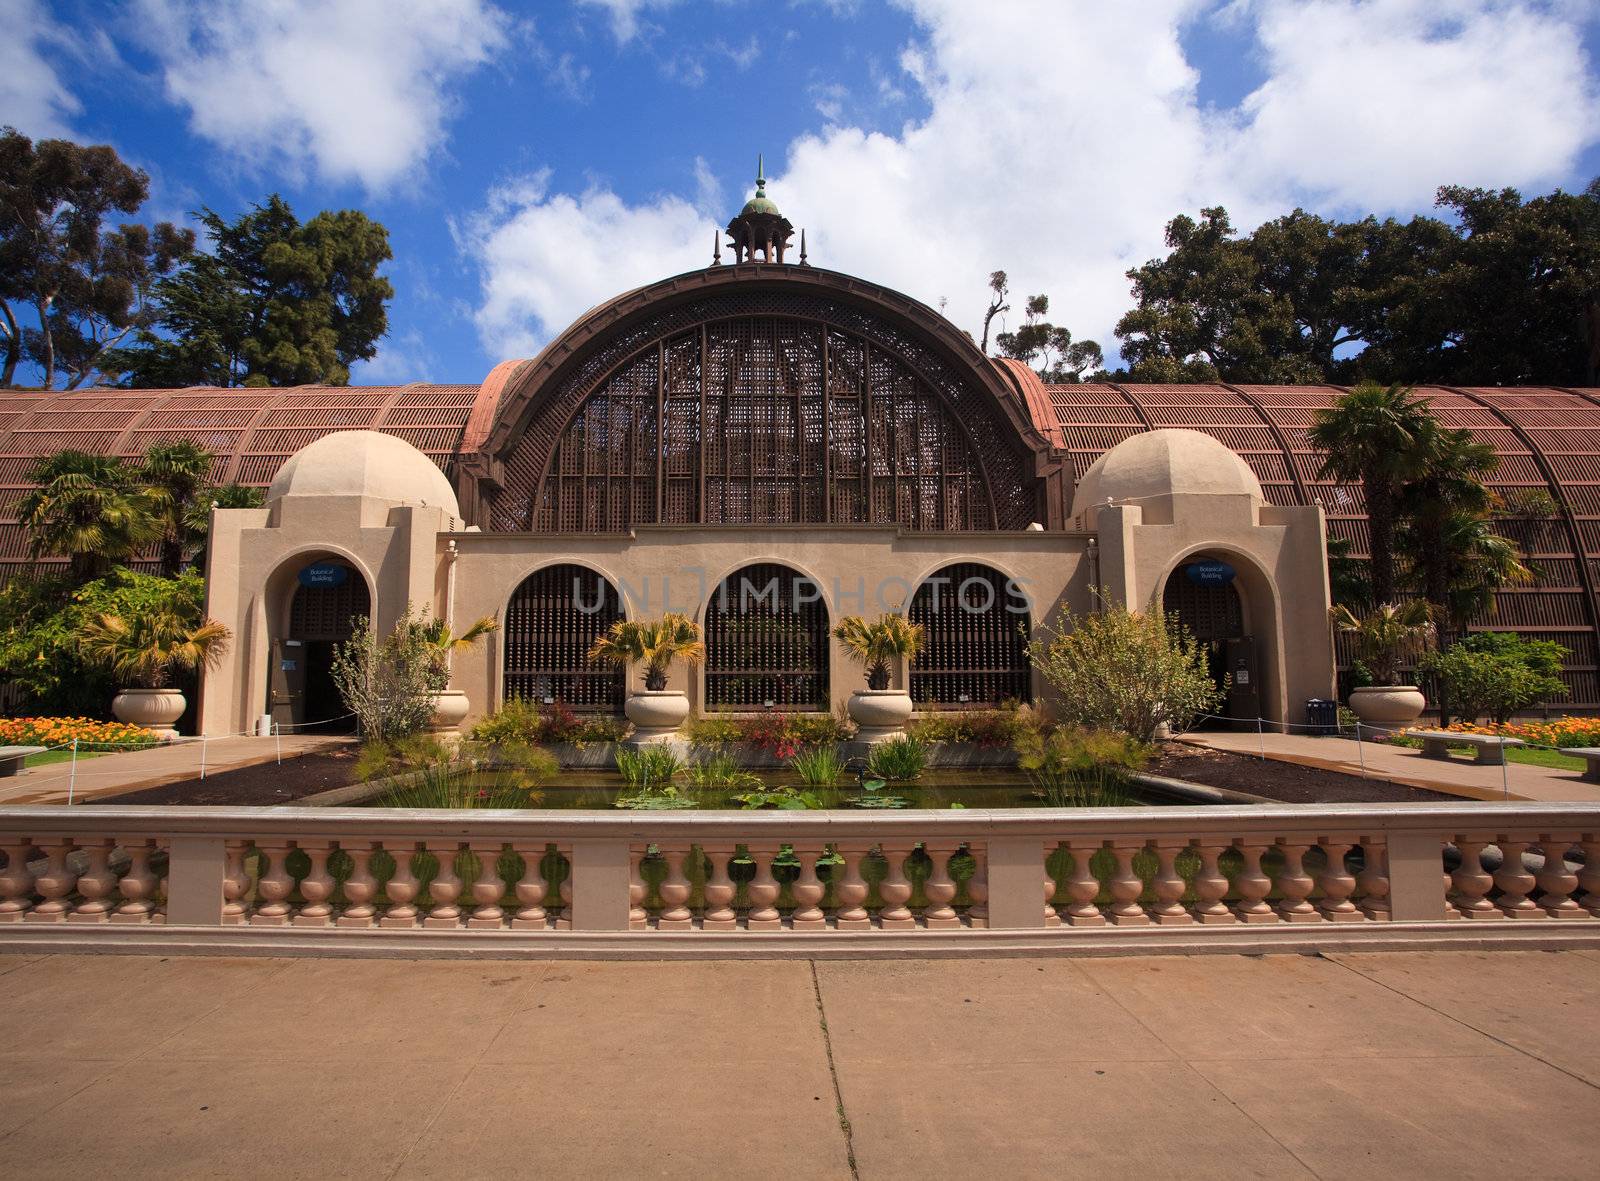 Botanical Building in Balboa Park in San Diego by steheap